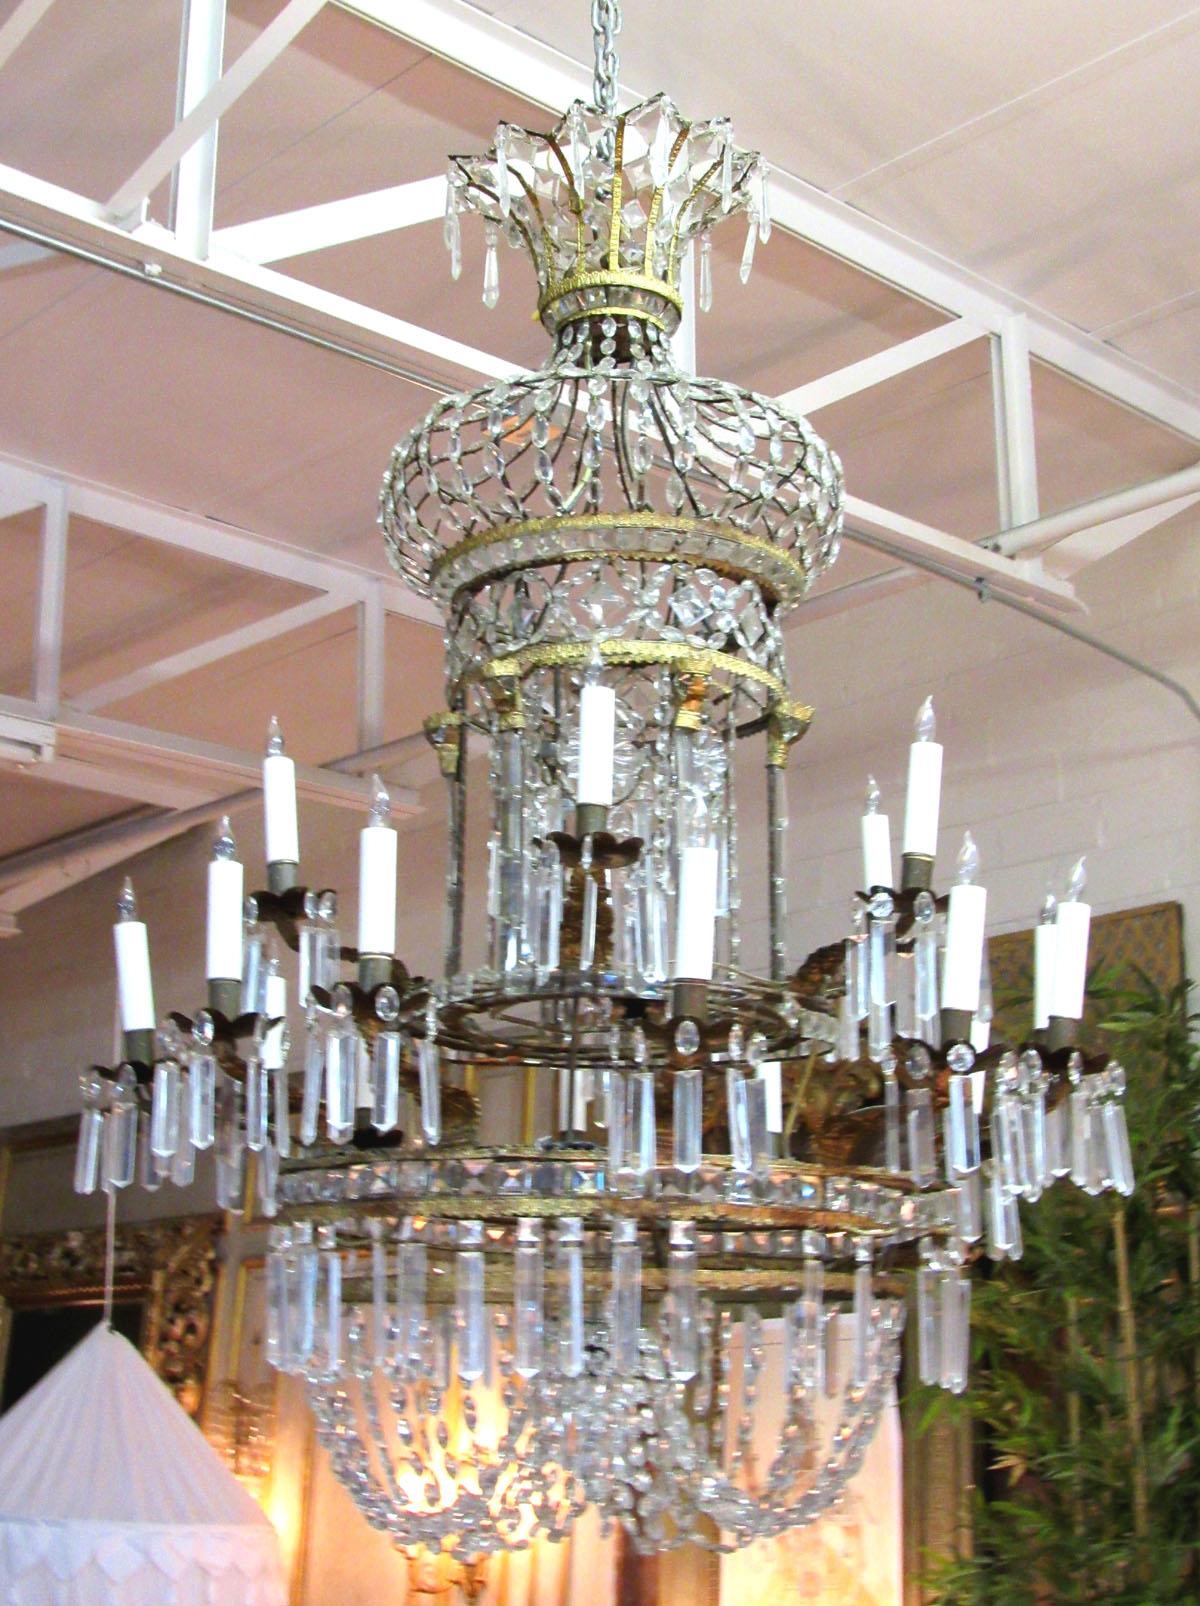 Gilt bronze and crystal Italian chandelier from circa 1790-1850, with two tiers of lights, six upper and twelve lower, supported by decorative candle branches with designs of stylized anthemion leaves. The candle branches attach to a large bronze